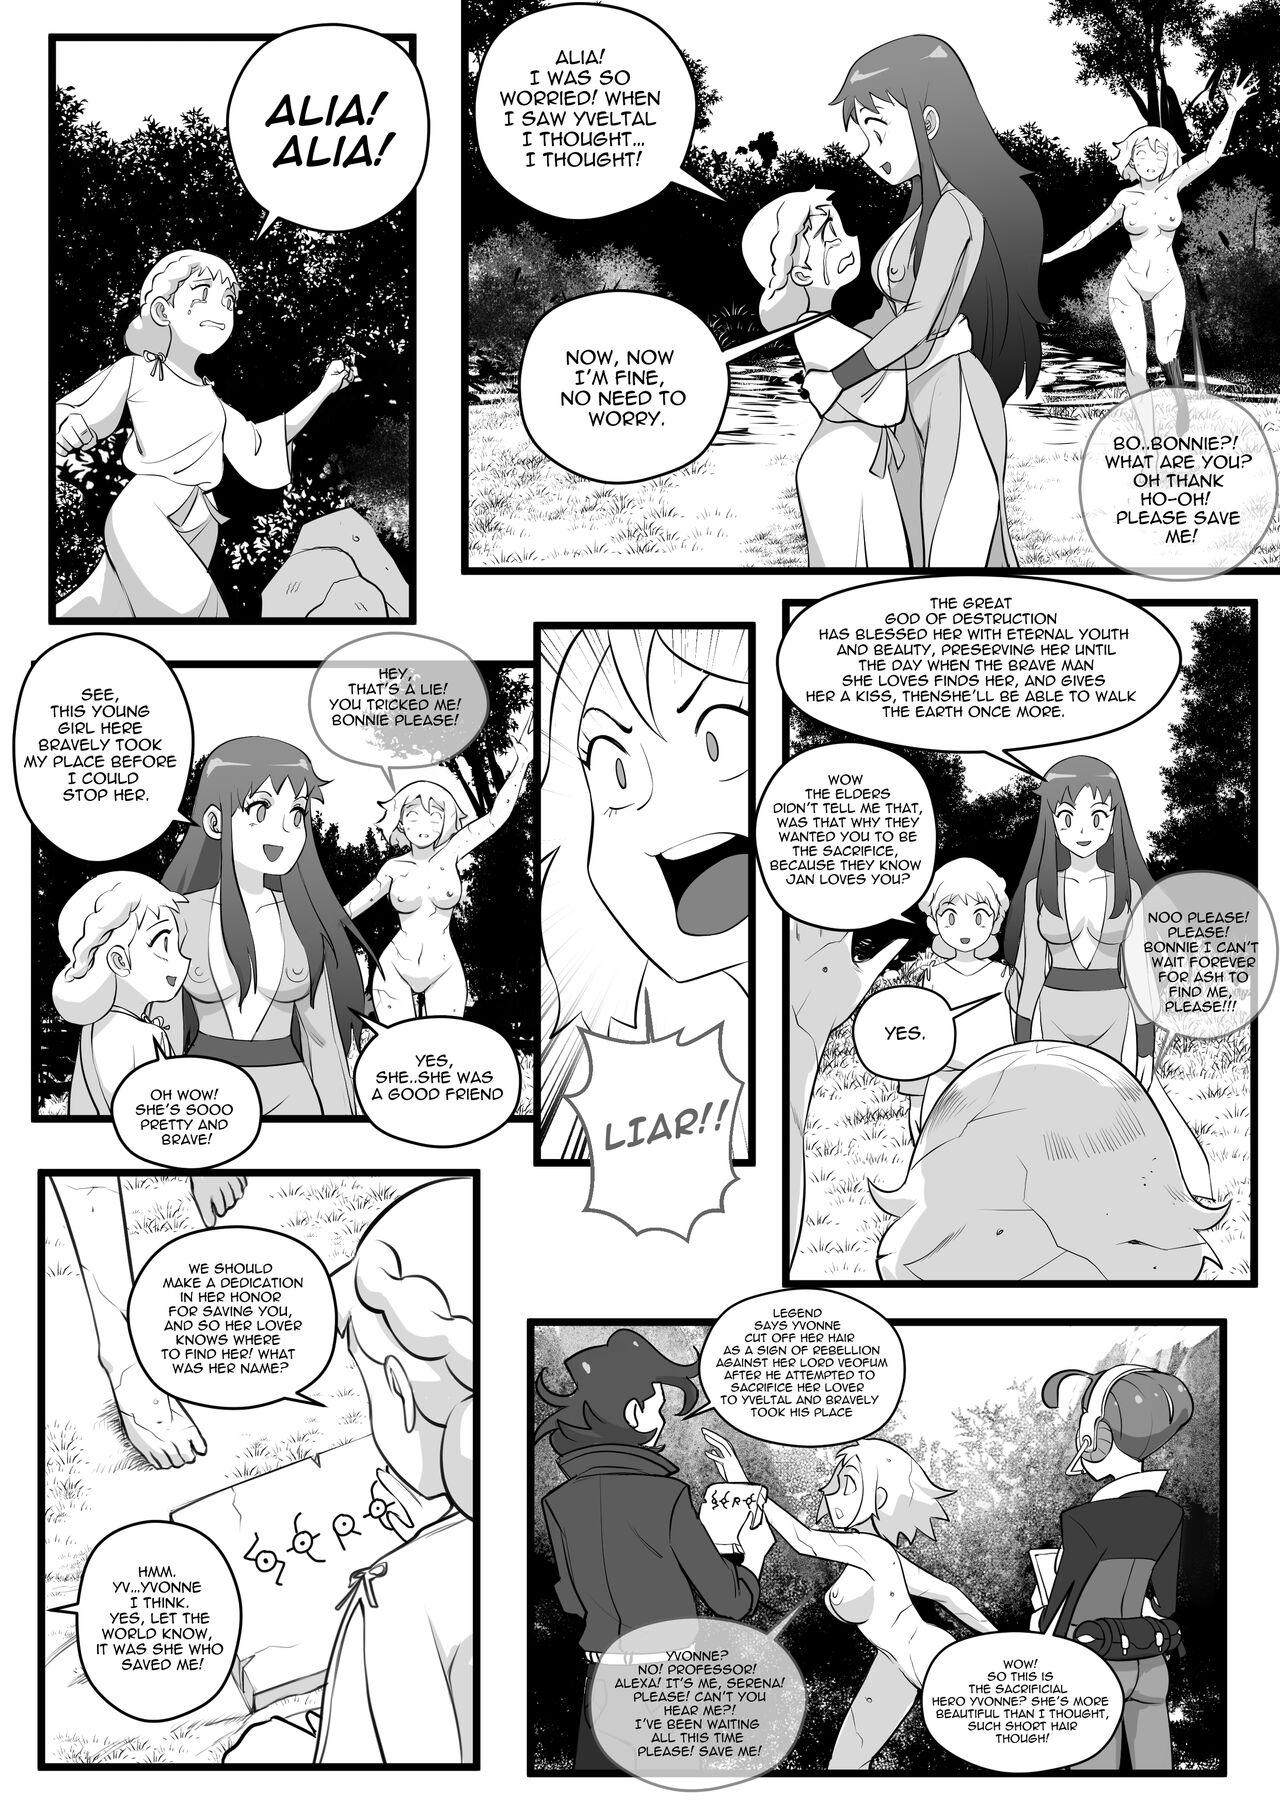 Office Serena: A Petrified Sacrifice though time! - Pokemon | pocket monsters Daddy - Page 4